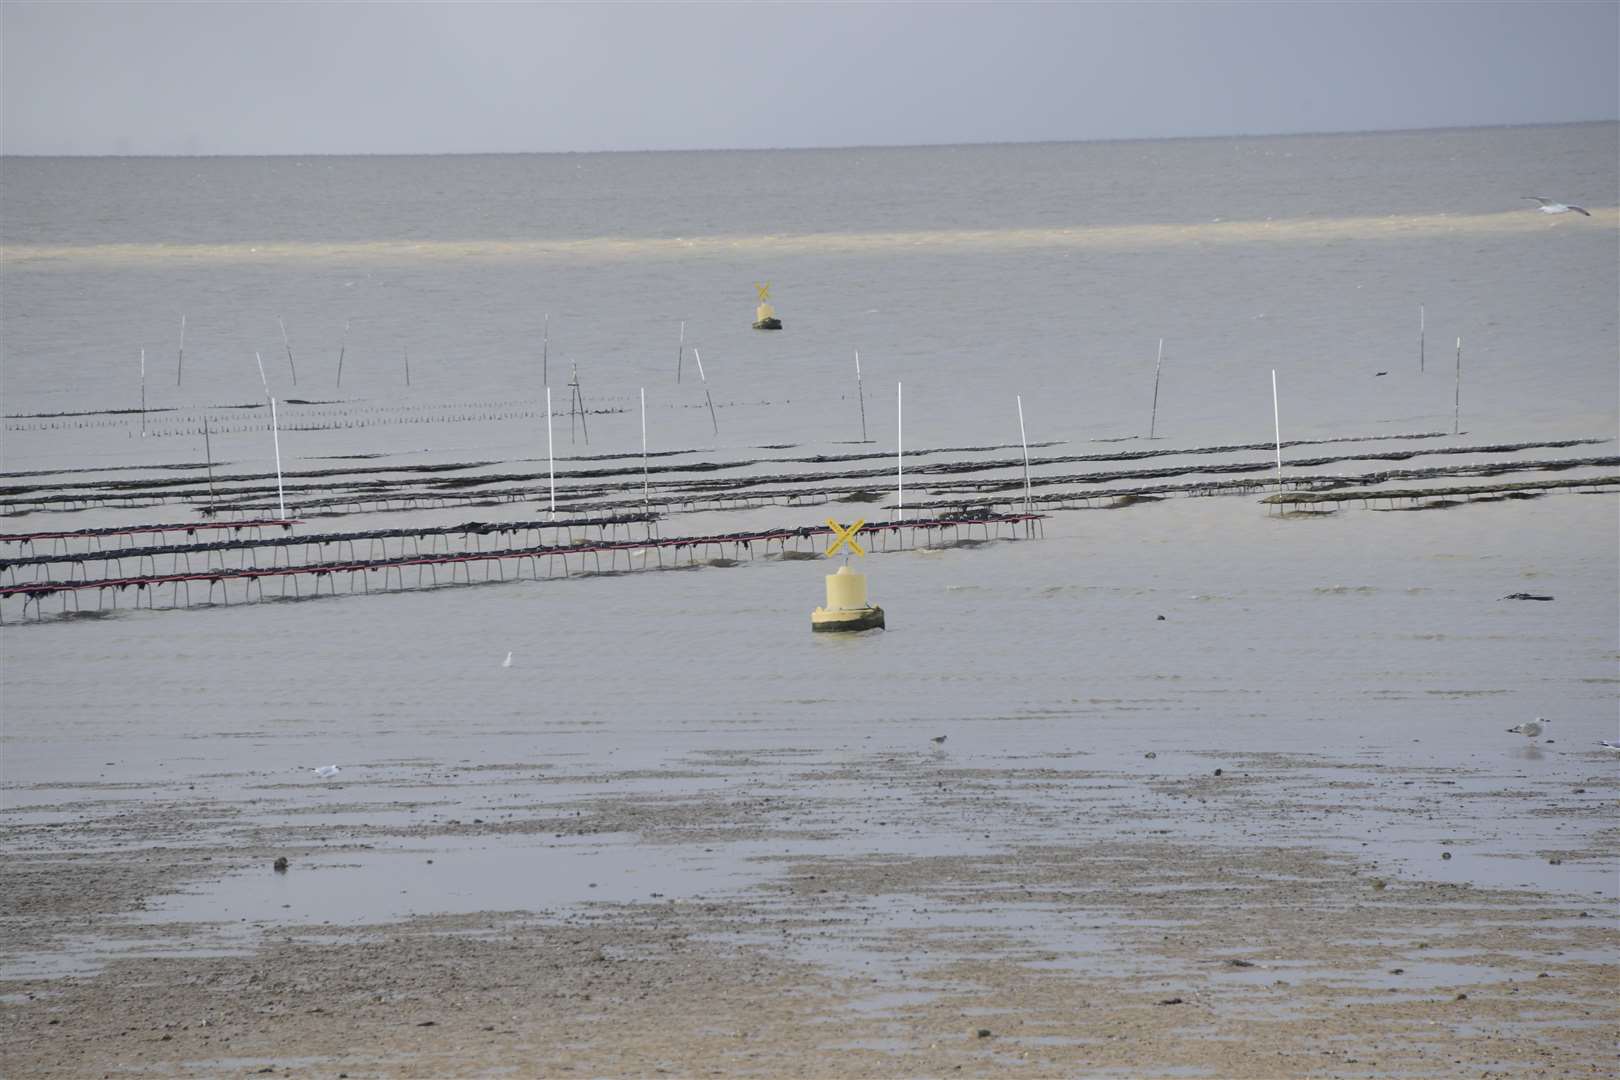 The Oyster Racks exposed at low tide